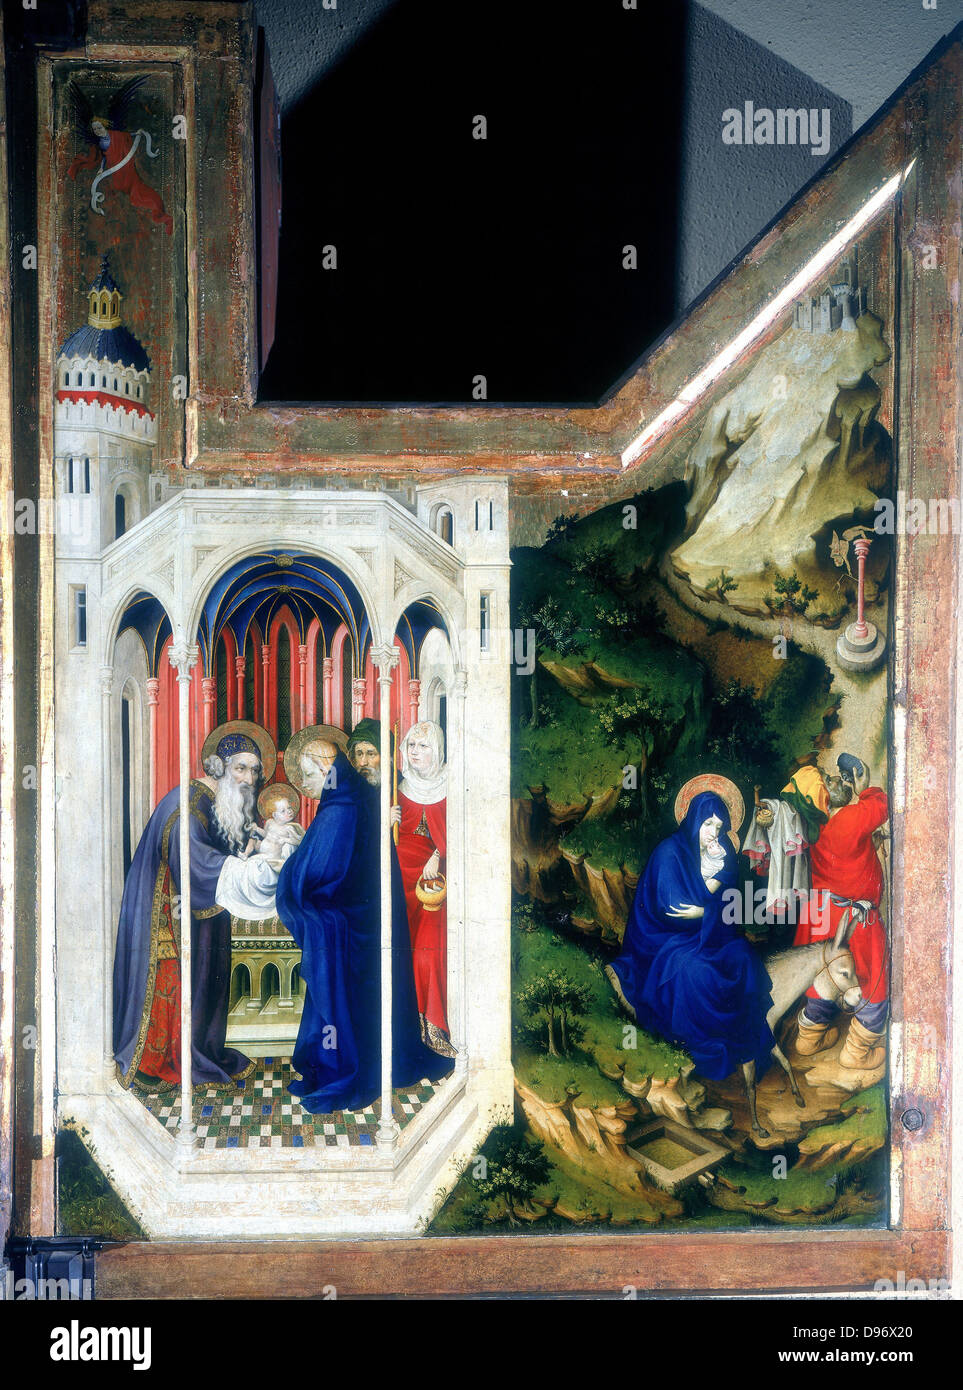 The Presentation at the Temple and The Flight Into Egypt. From a triptych. Virgin Mary, St Simeon, the prophetess Anna, St Joseph Holy Family. Melchior Broederlam (active 1381-1409) Netherlands painter. Stock Photo